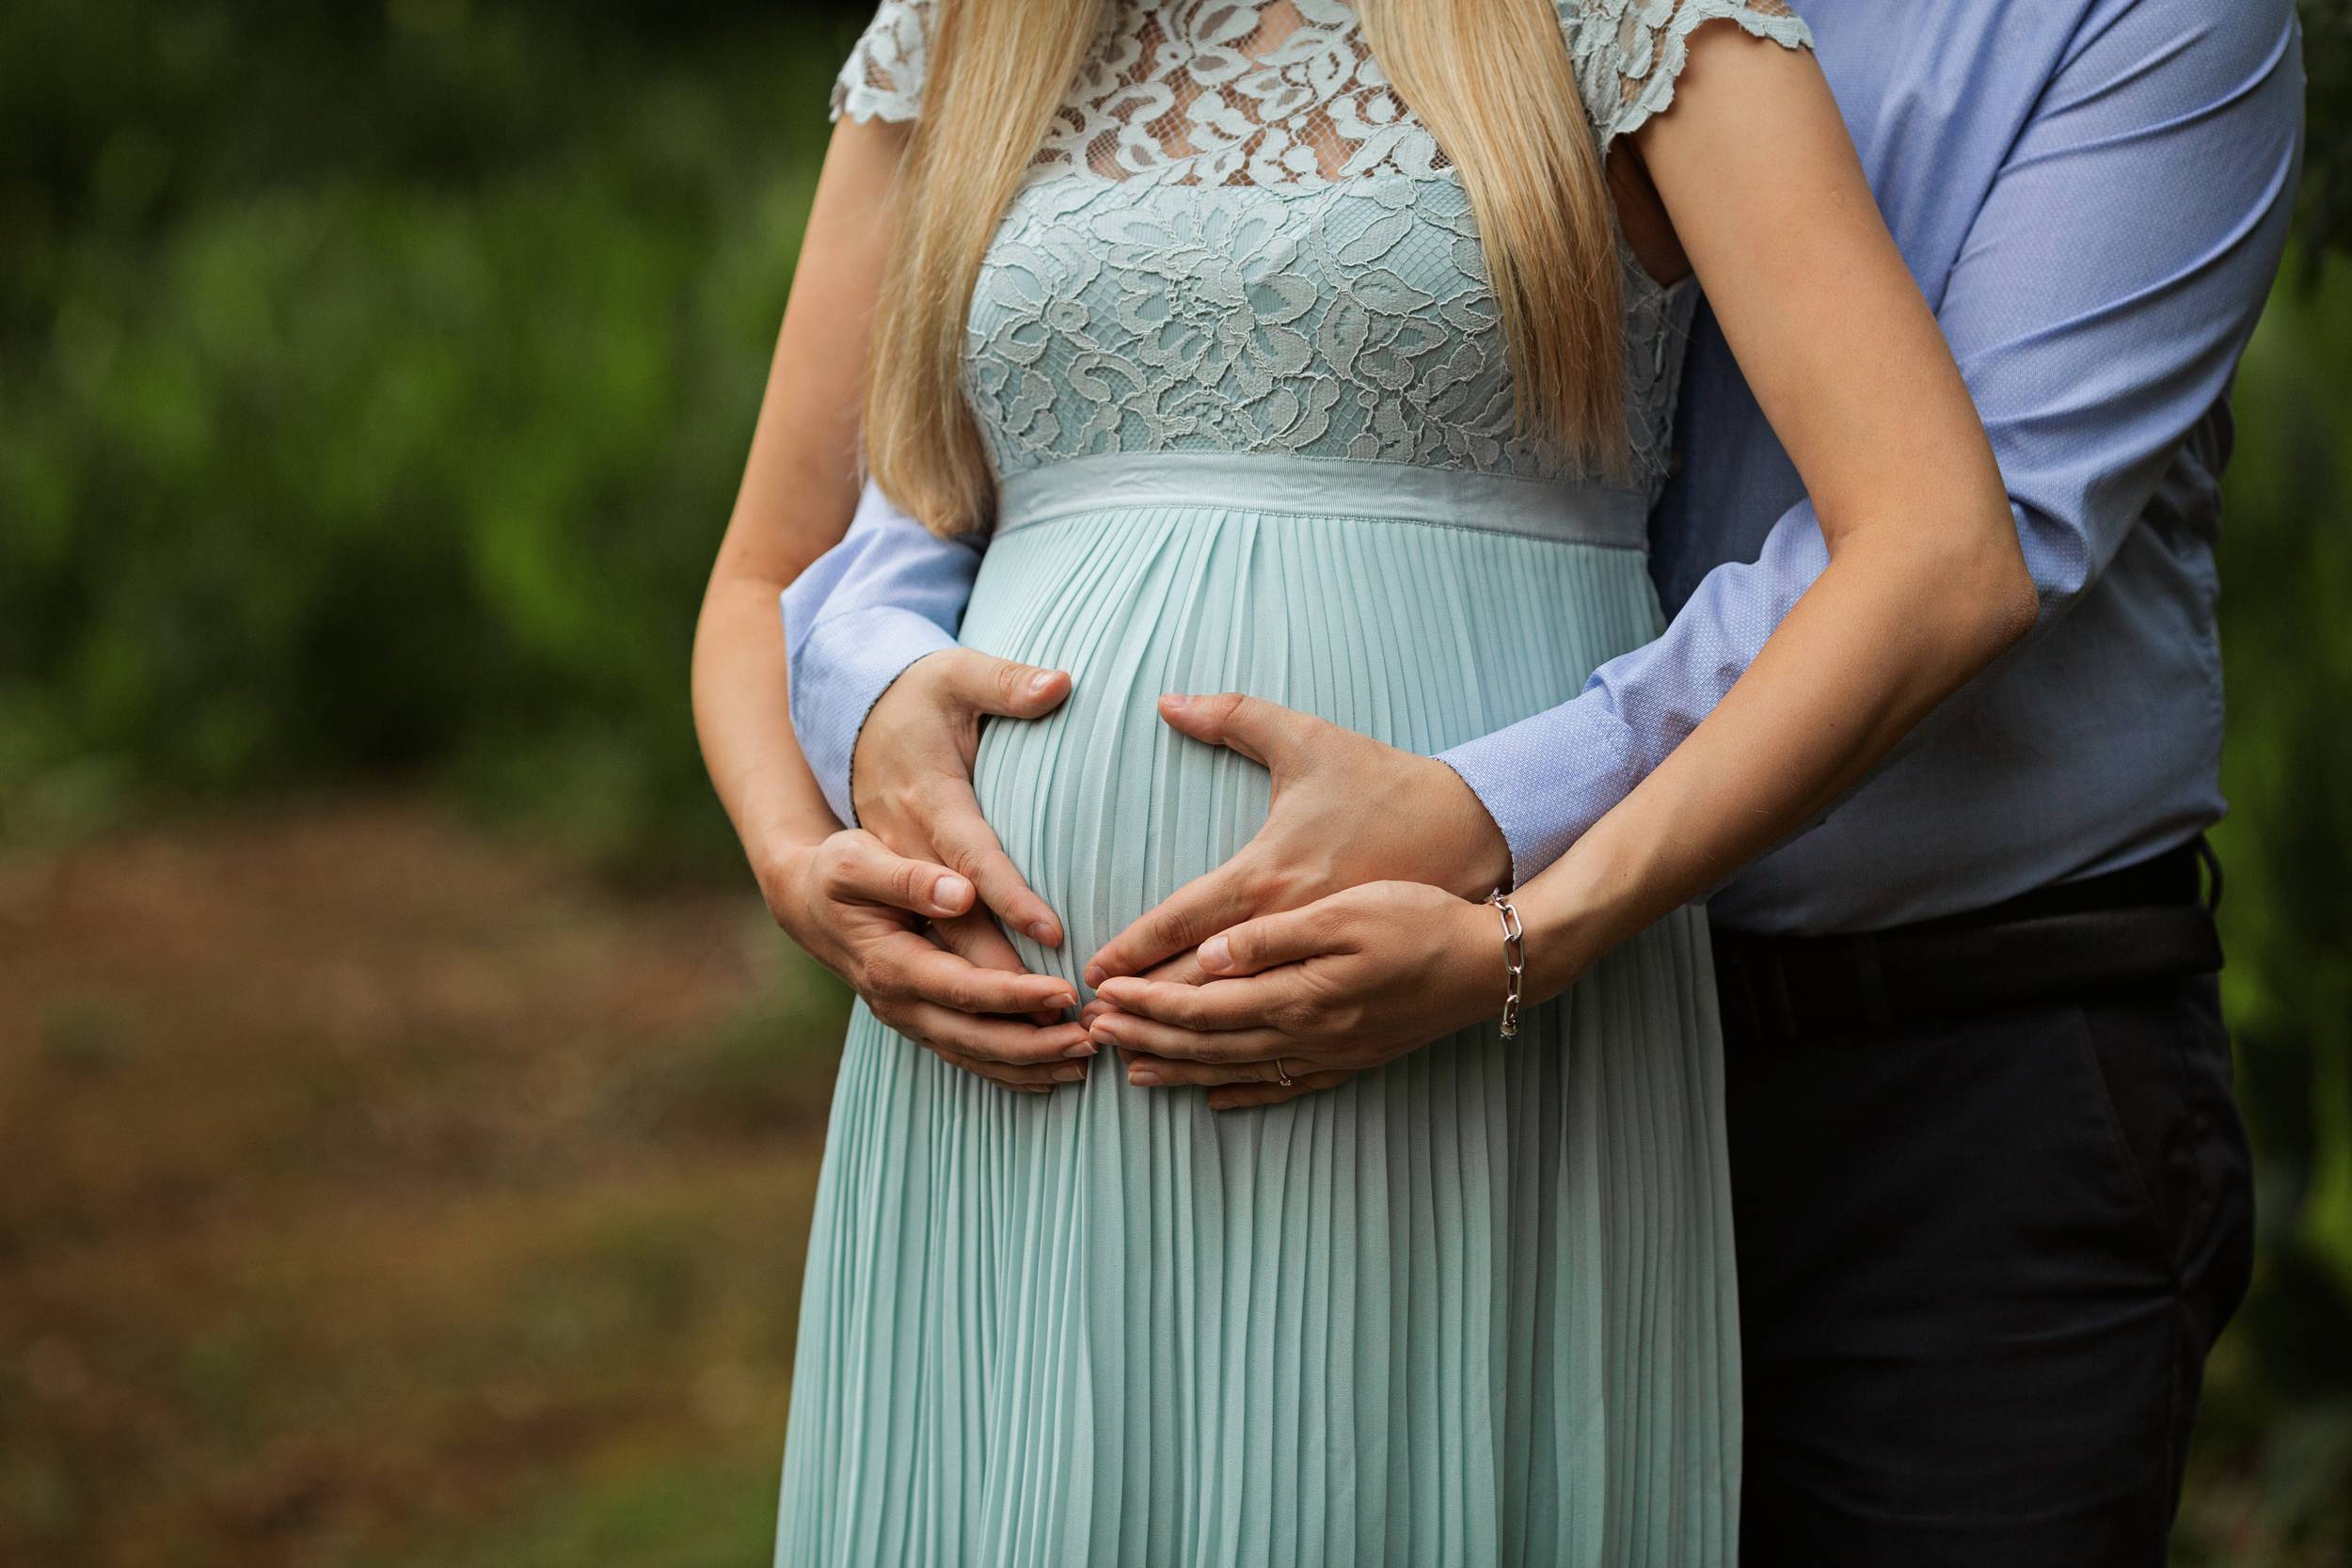 pregnant-woman-in-evening-dress-holds-hands-with-h-2022-11-12-02-20-23-utc_INmQraCXE.jpg